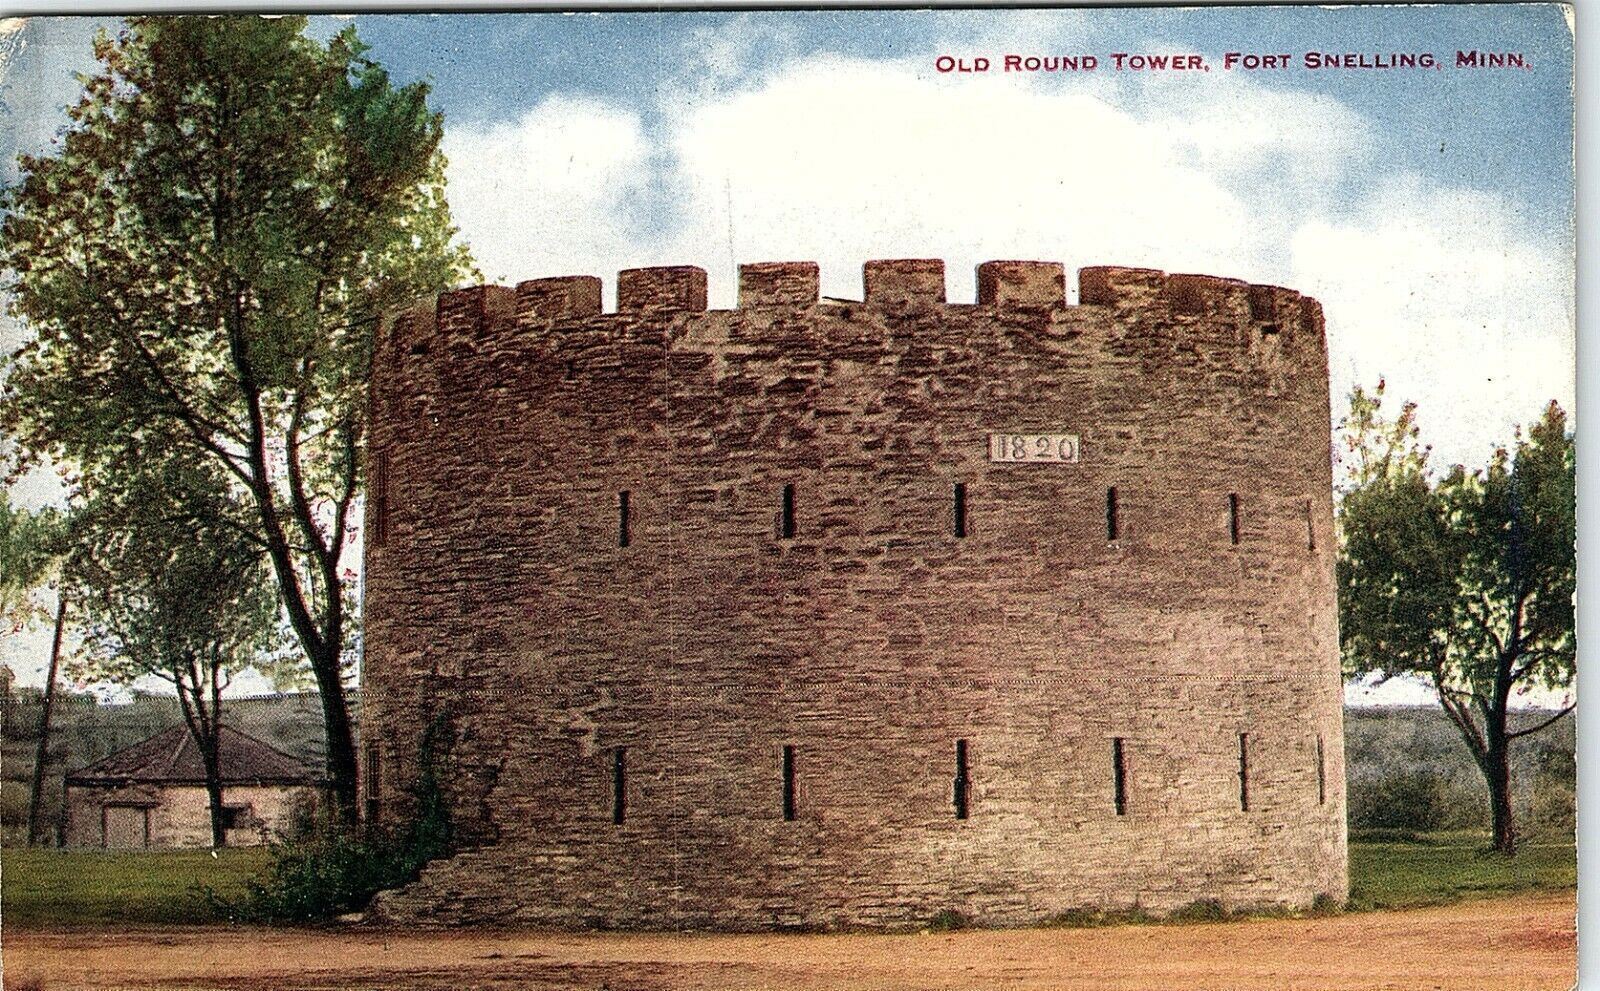 Vintage Fort Snelling Minn. Old Round Tower VO Hammon Publishing Postcard 13-12